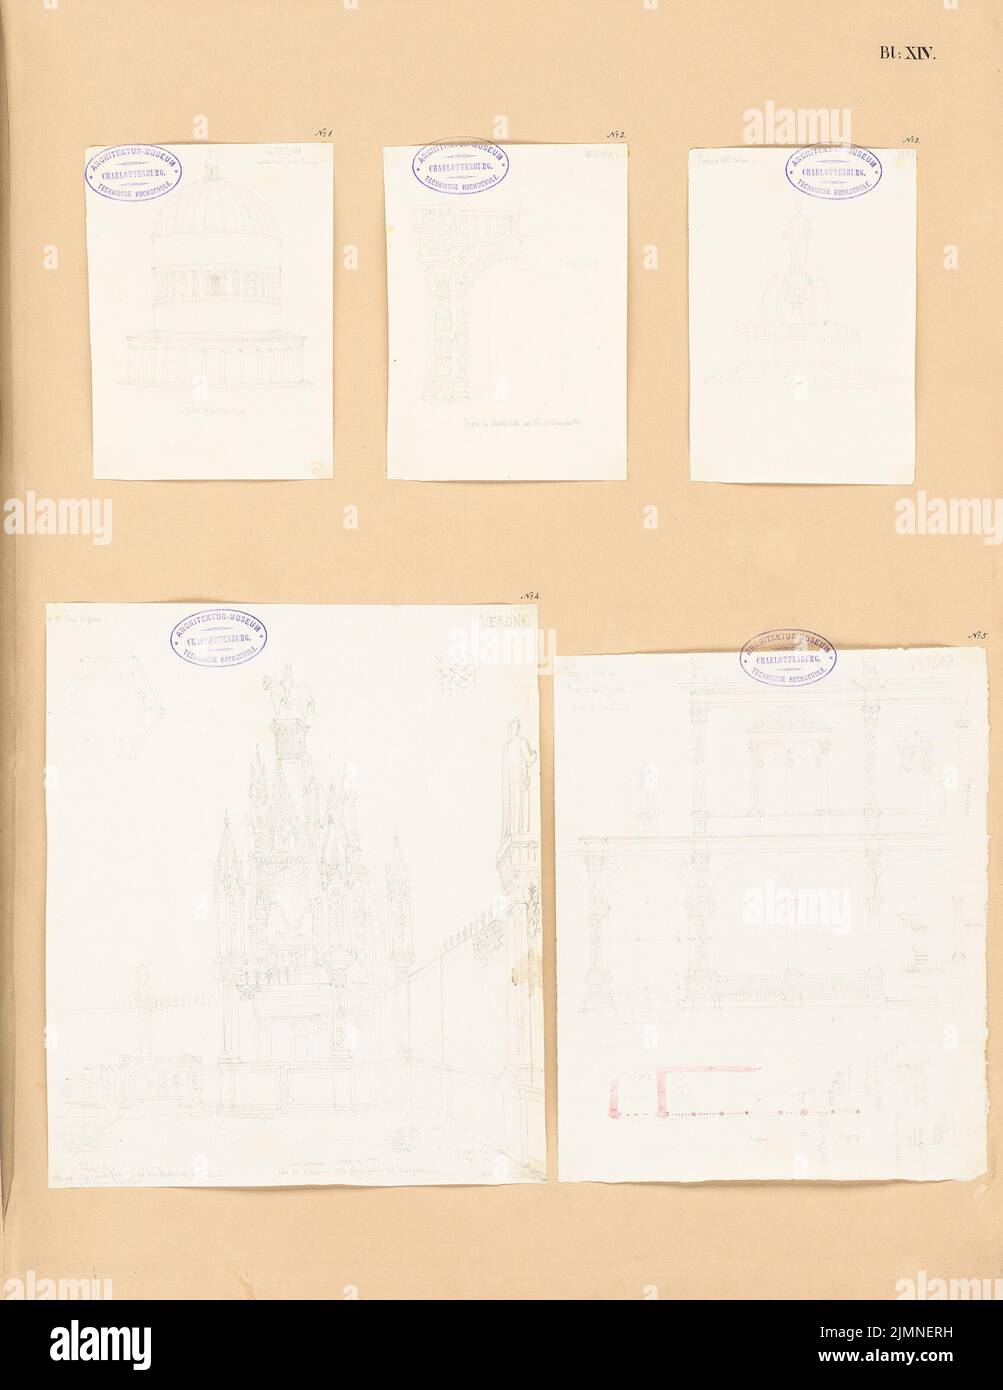 Liemann Ludwig Theodor, sketchbook of the Italian journey (without dat.): Bl. 14: Verona. 5 sketches: S. Giacomo (perspective view), Palazzo del Comandante, P.zza dell'erba, tomb of the Can Signore, Loggia Pubblica P.Z. Pencil watercolored on paper, 60.5 x 46.7 cm (including scan edges) Stock Photo